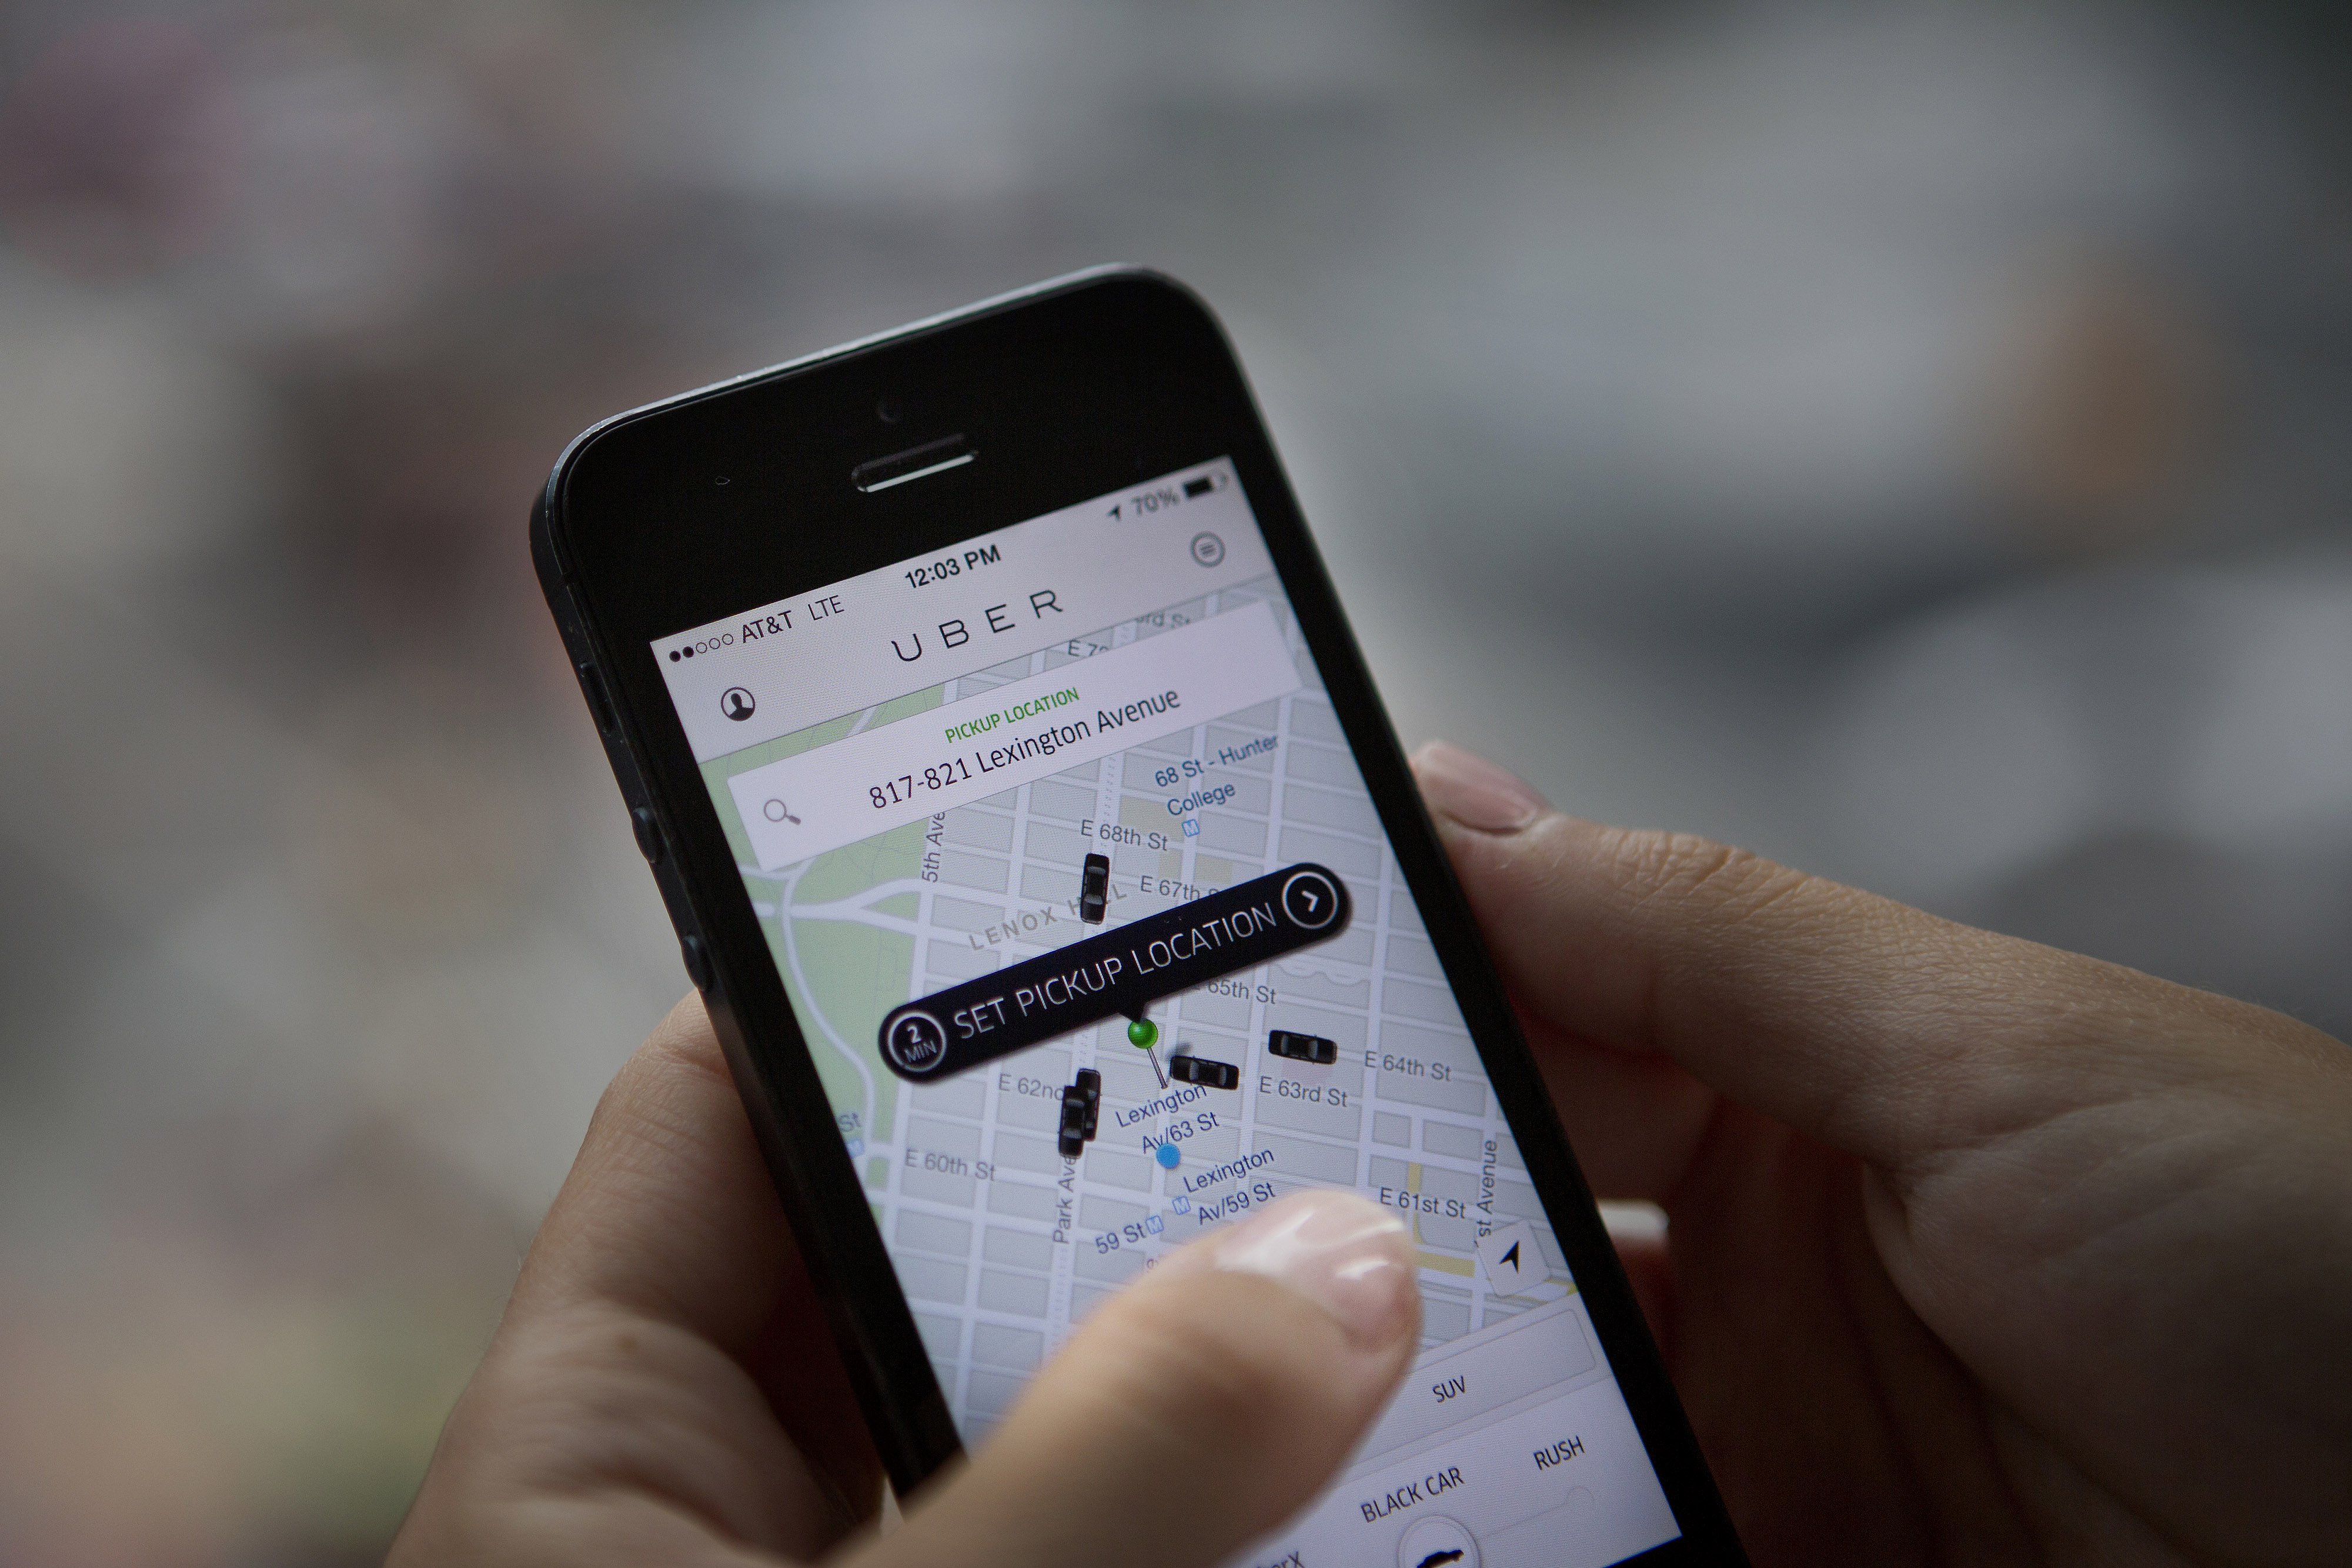 Th Uber Technologies Inc. car service application (app) is demonstrated for a photograph on an Apple Inc. iPhone in New York, U.S., on Wednesday, Aug. 6, 2014. (Bloomberg&mdash;Bloomberg via Getty Images)